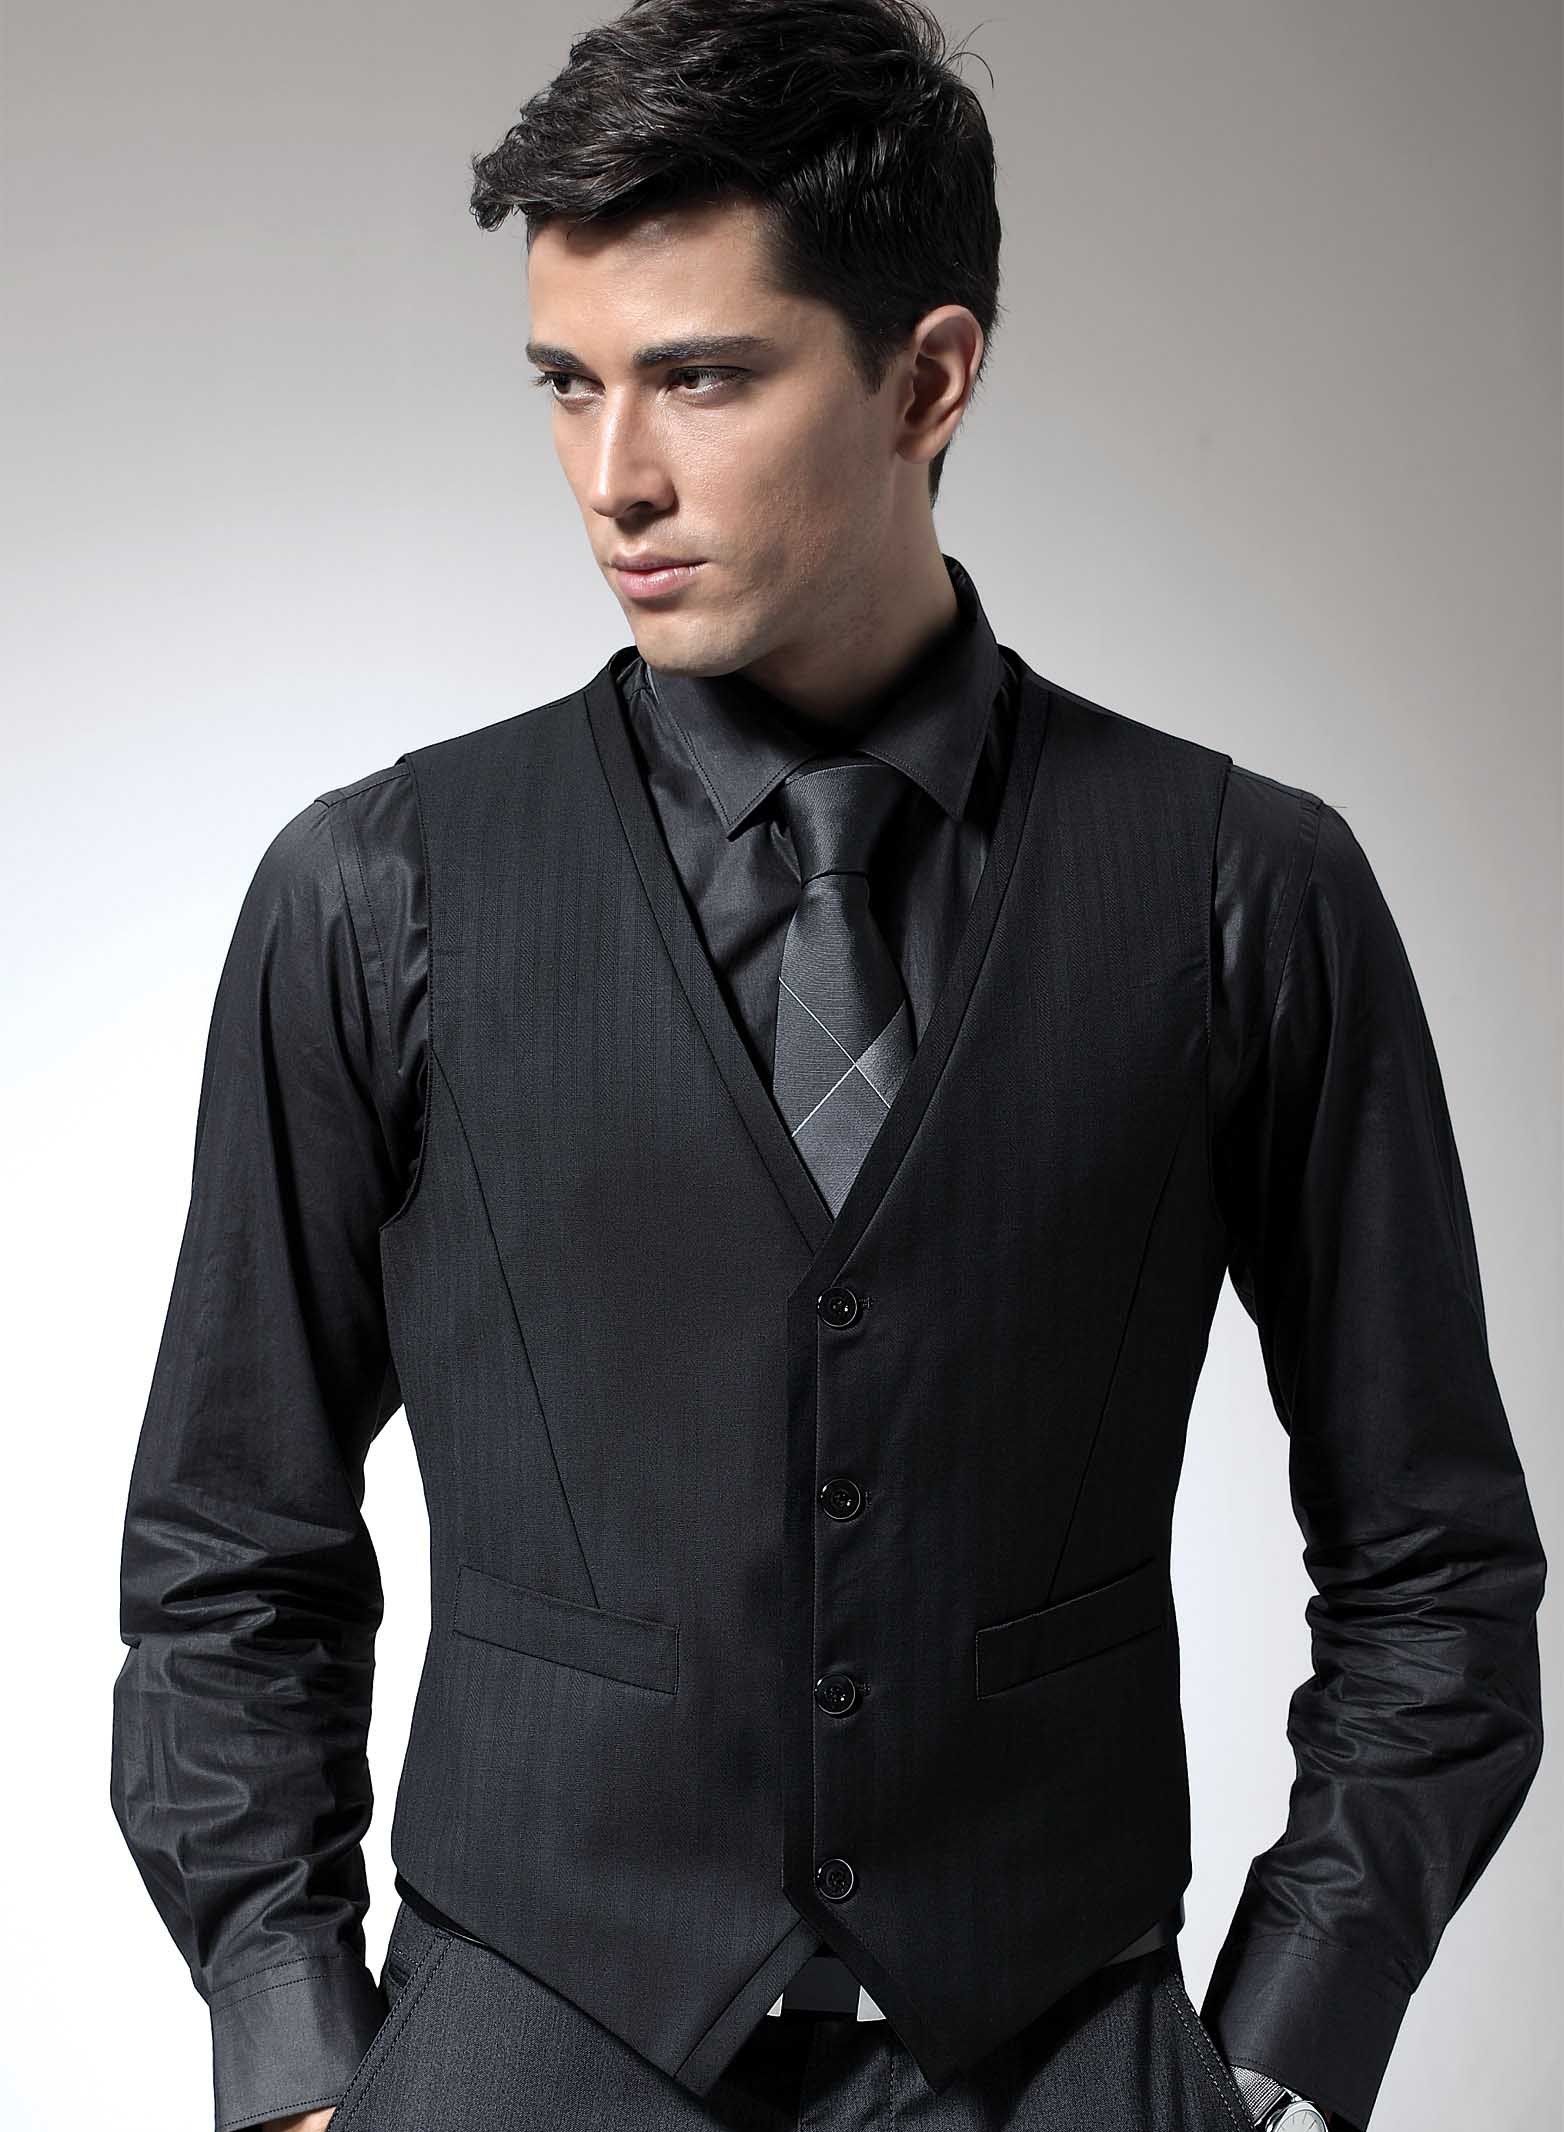 mens fashion wallpaper,clothing,suit,outerwear,formal wear,sleeve